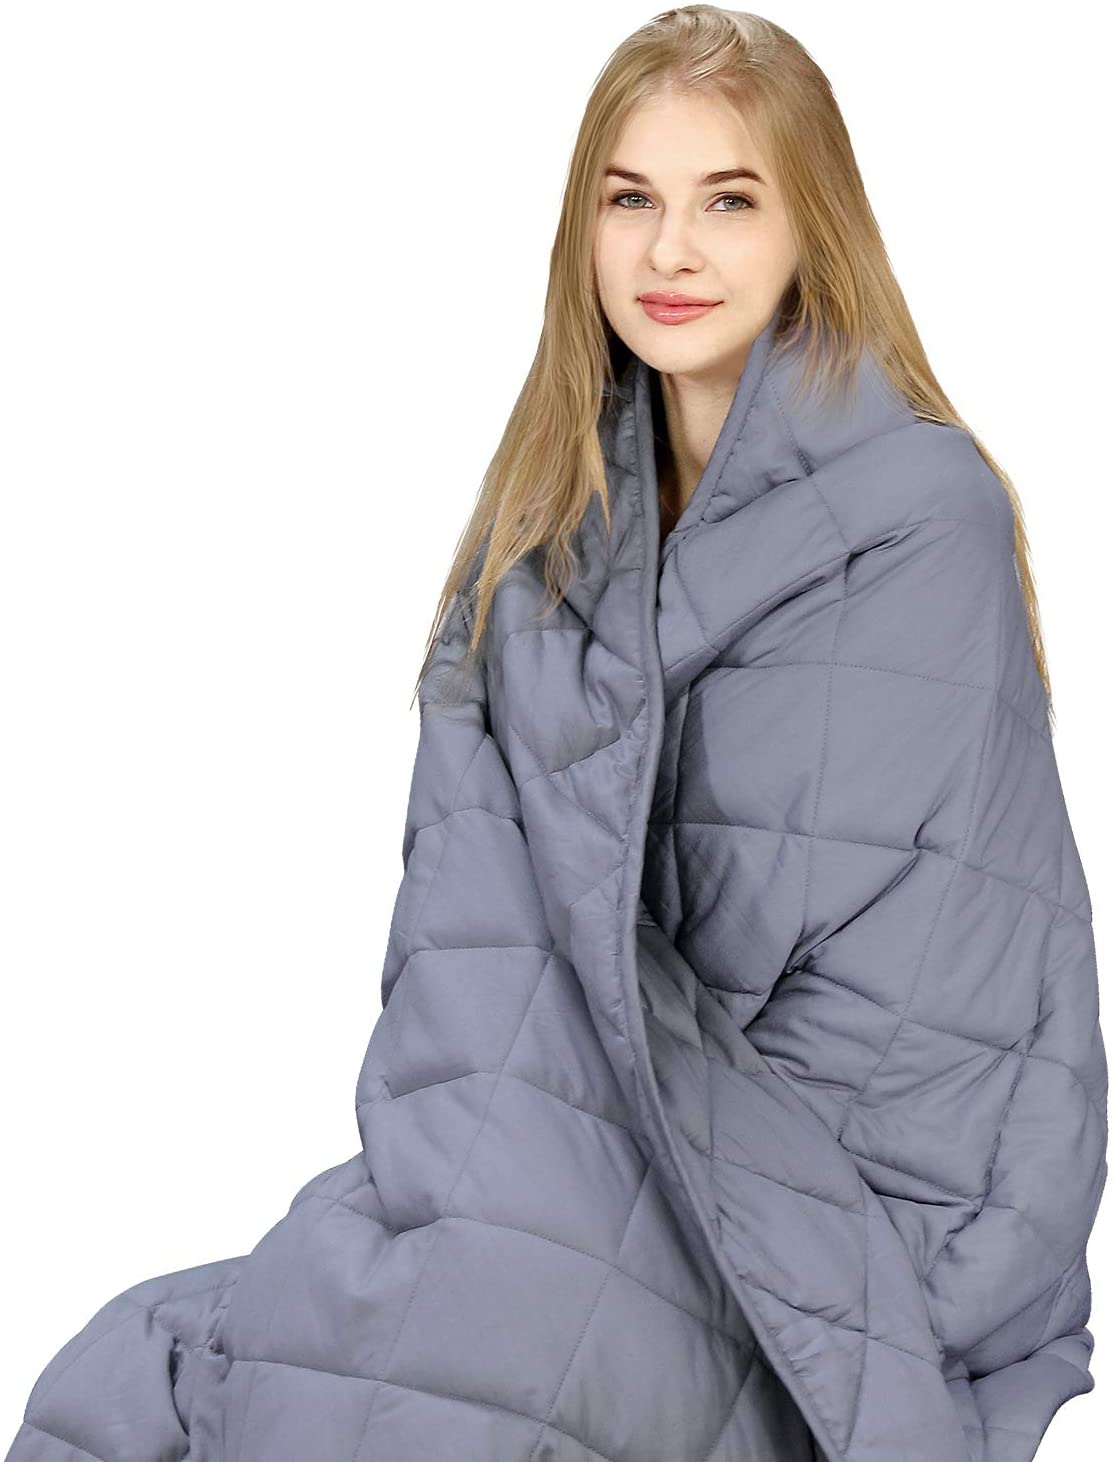 Amazon Lowest Price: 12 Pound Weighted Twin Blanket